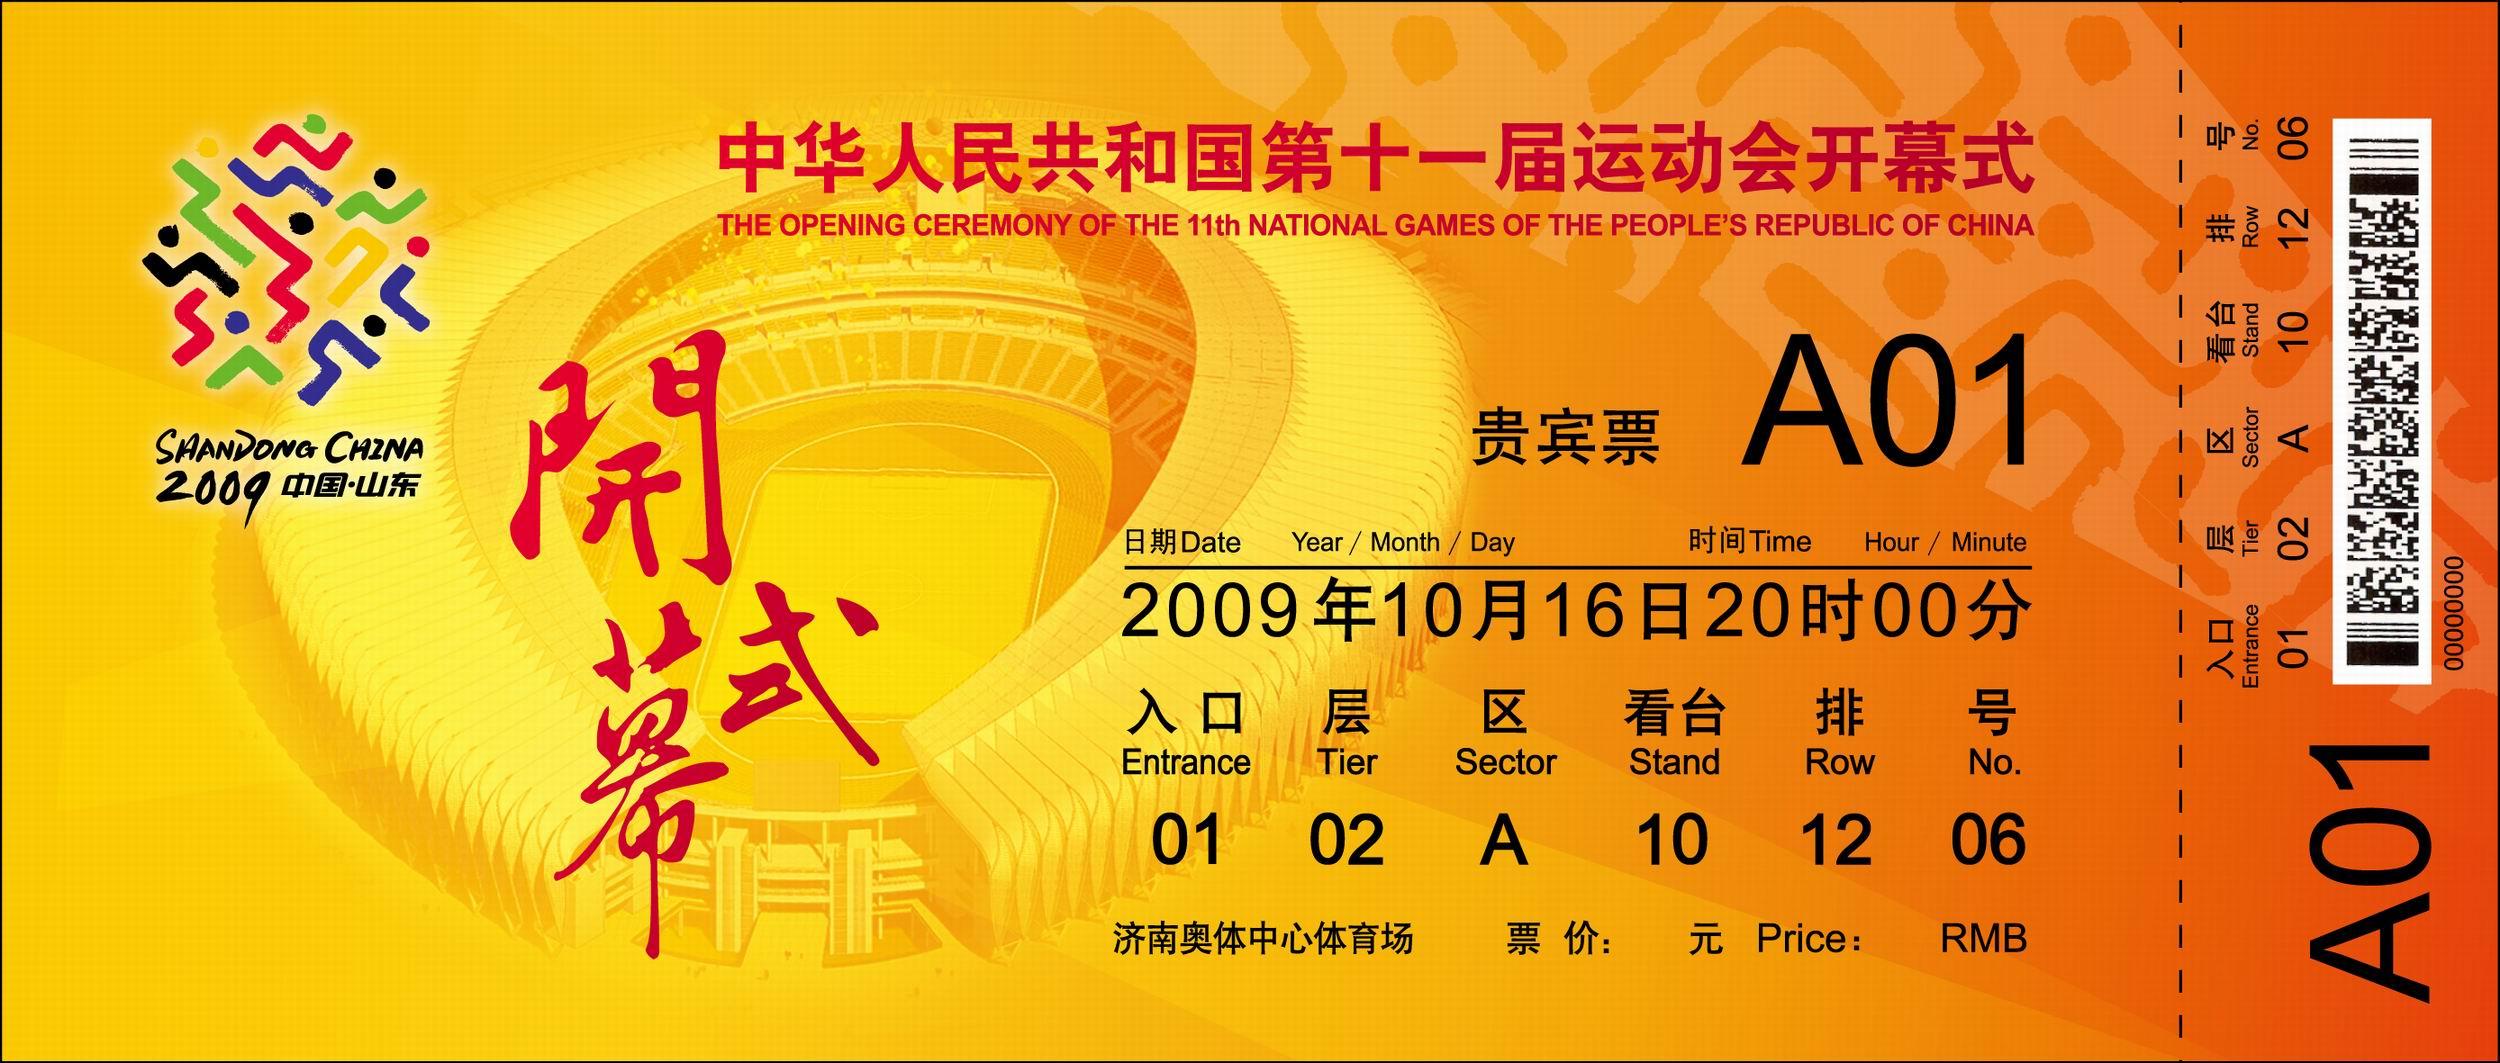 Tonfang  RFID  -  E  Ticket  has  served  the     Opening  &  closing  ceremony  of  the  11th  national  games